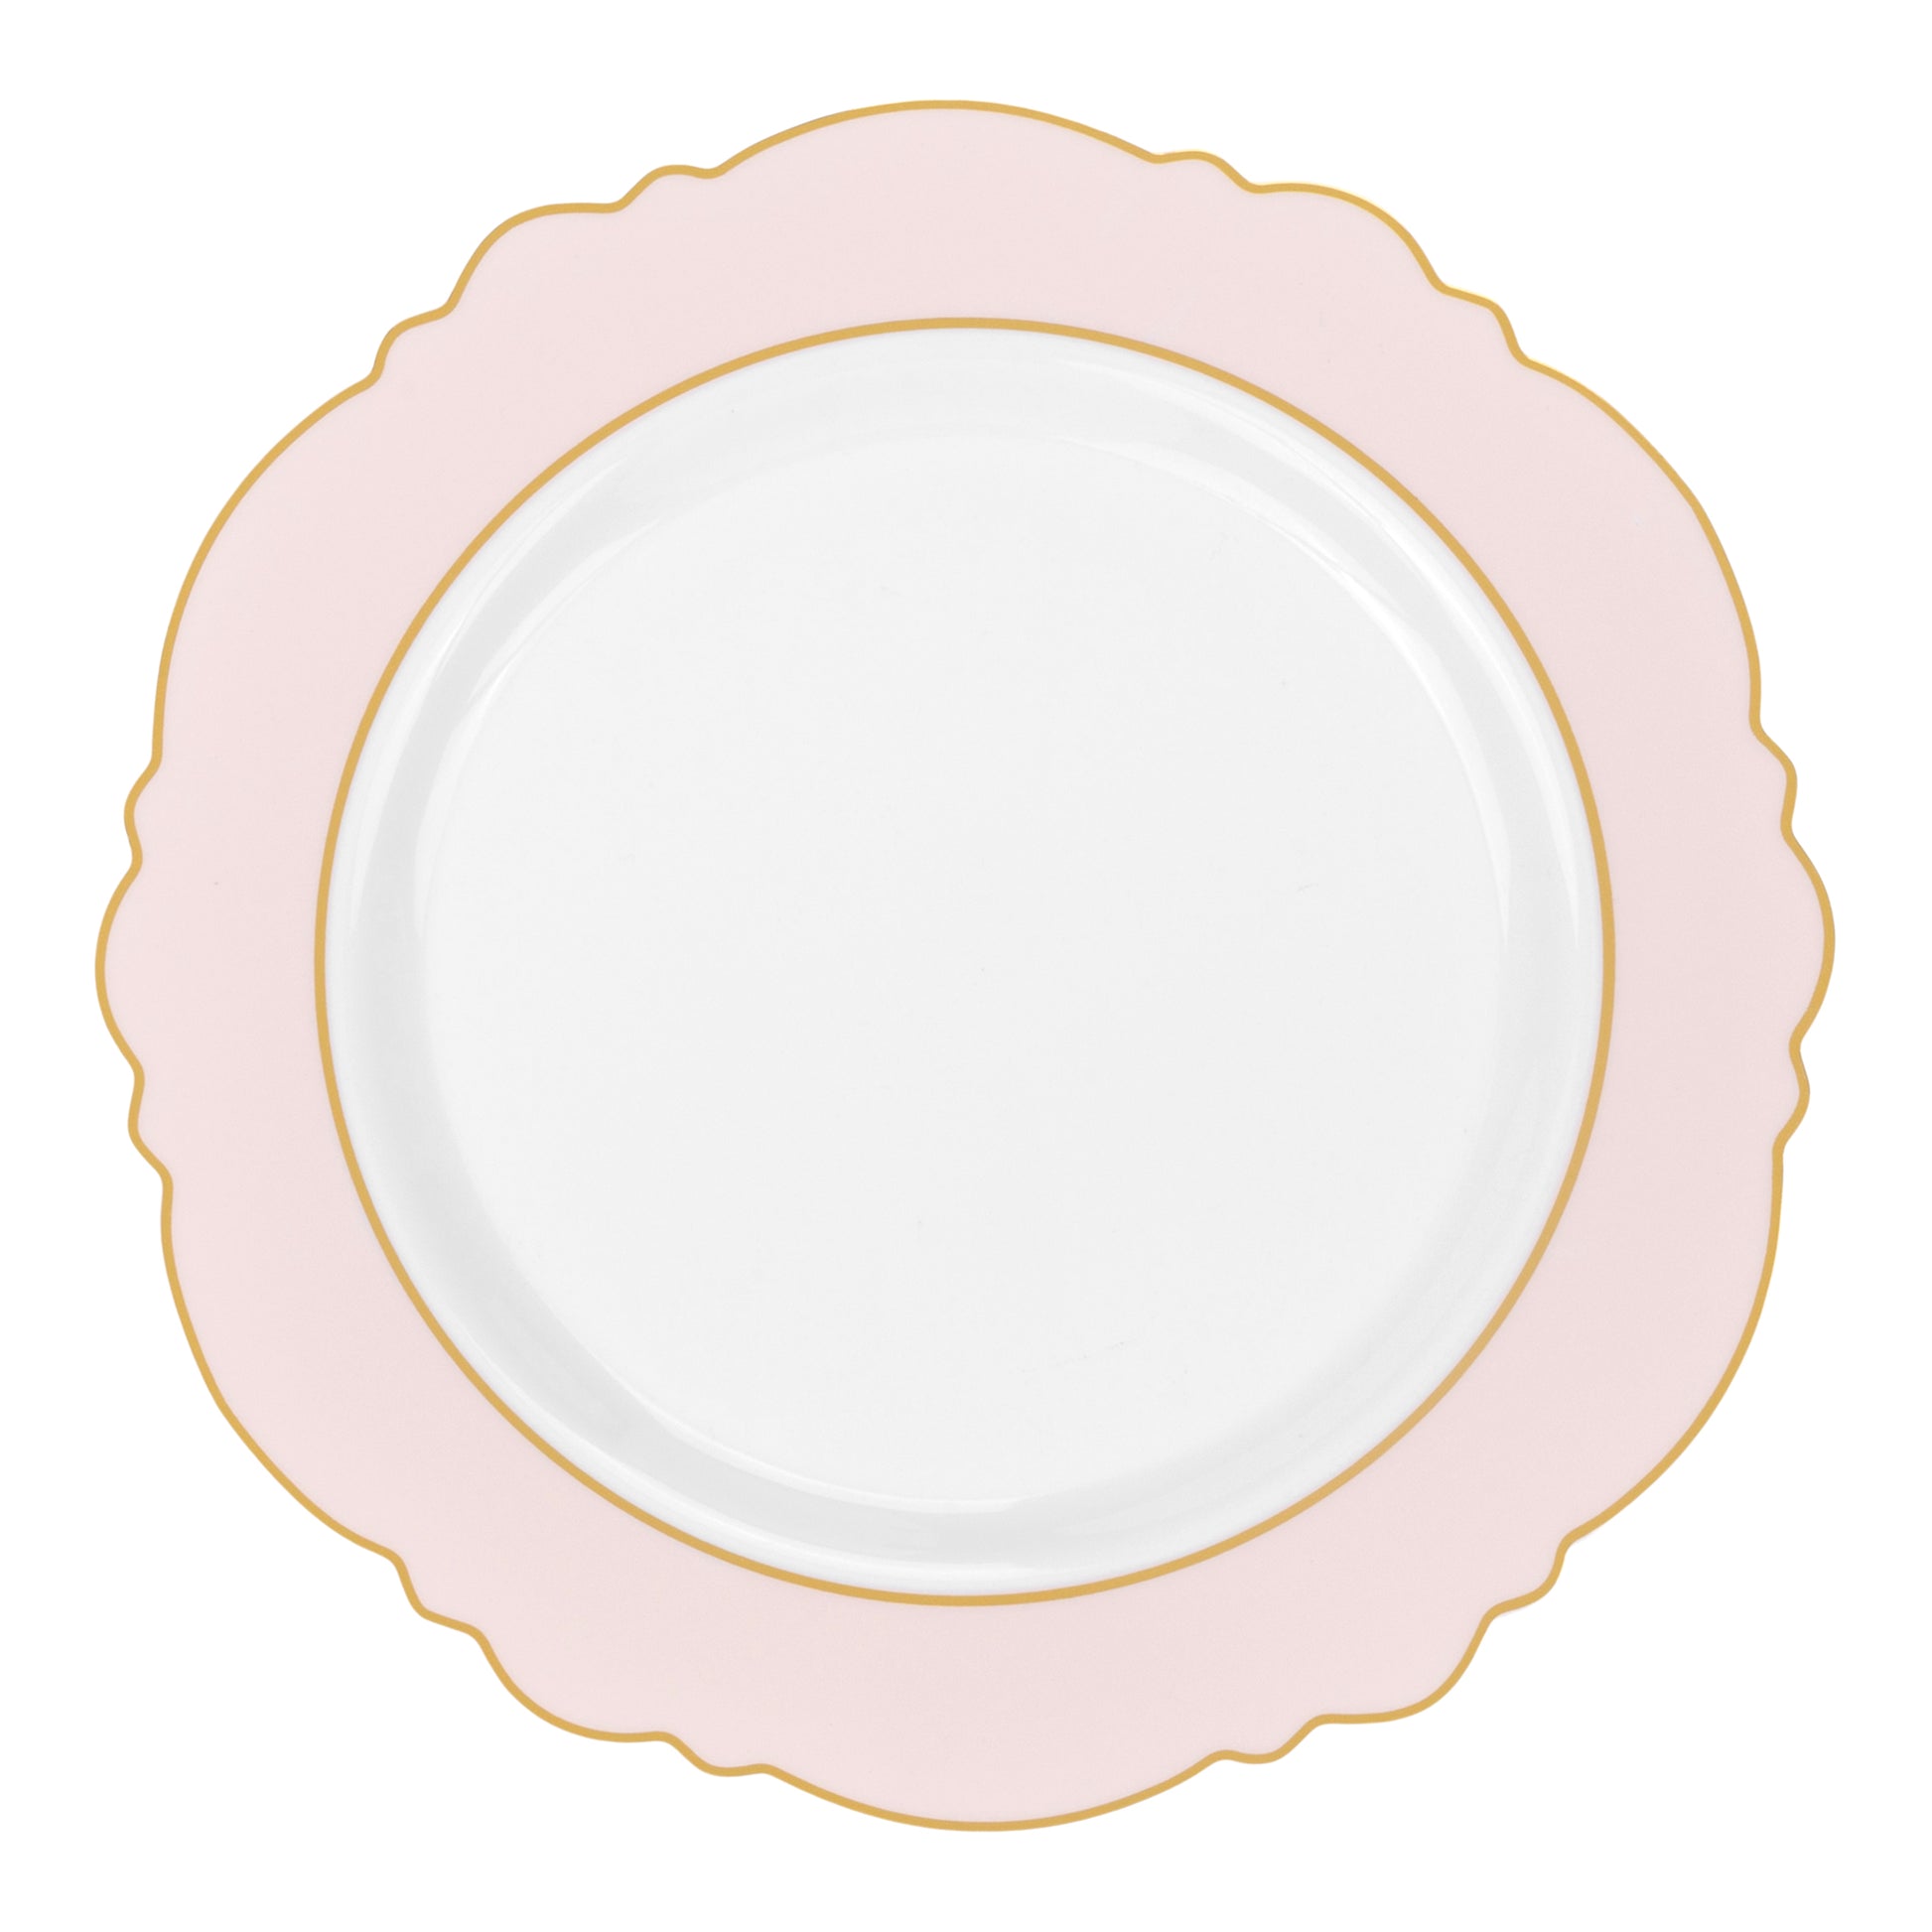 Scallop Disposable Plastic Plates 40 pcs Combo Pack - Pink & Gold-Trimmed